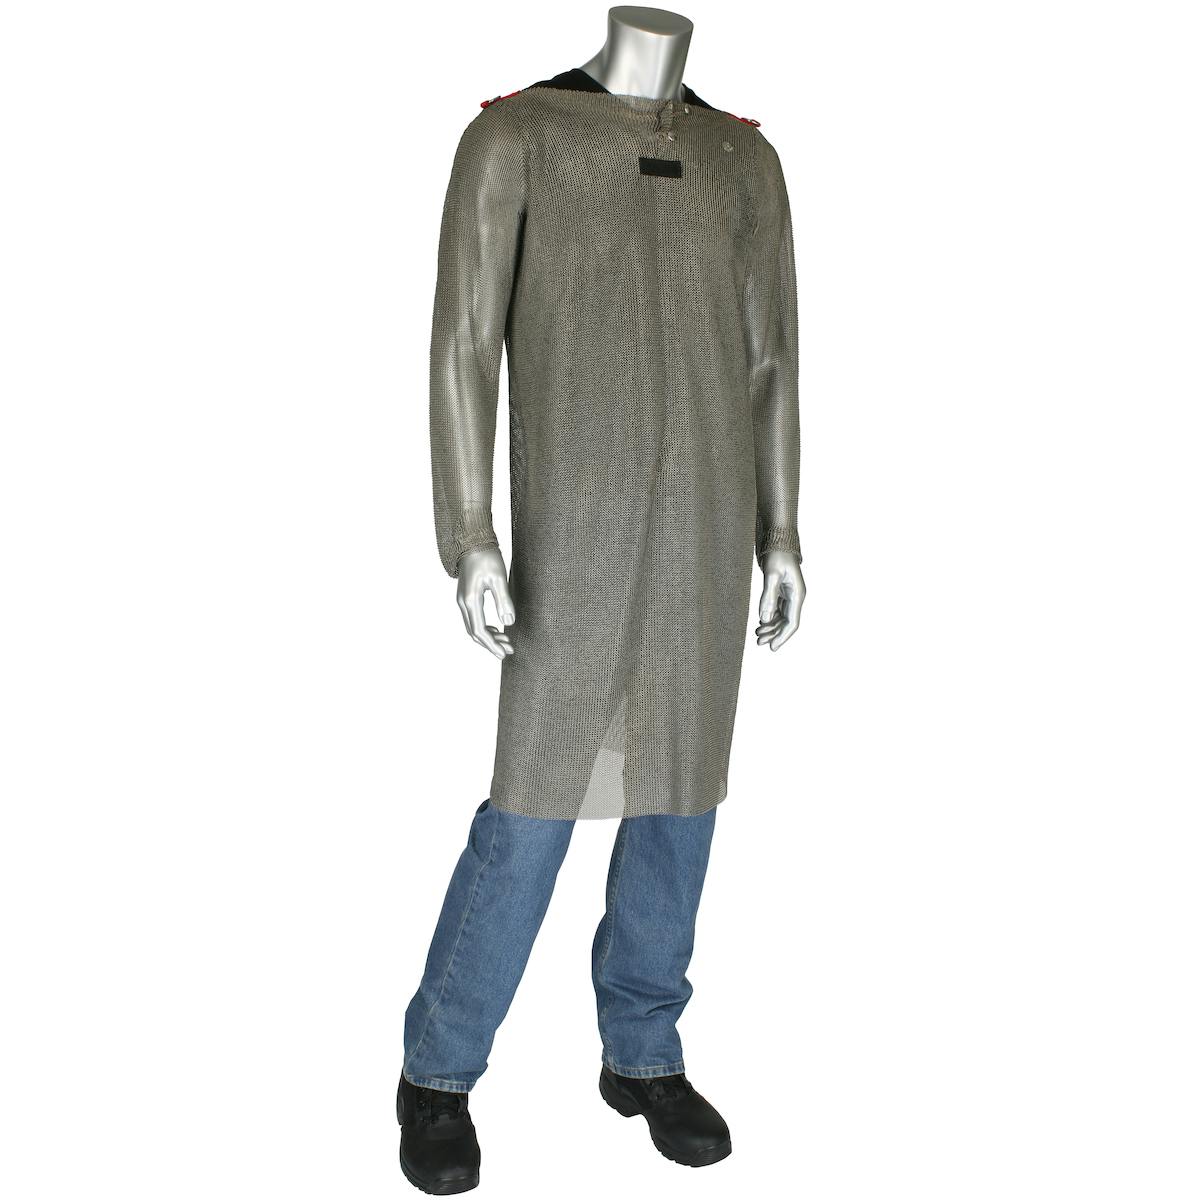 Titanium Wire Ring Mesh Full Body Tunic with Sleeves, Silver (USM-4301TI)_1